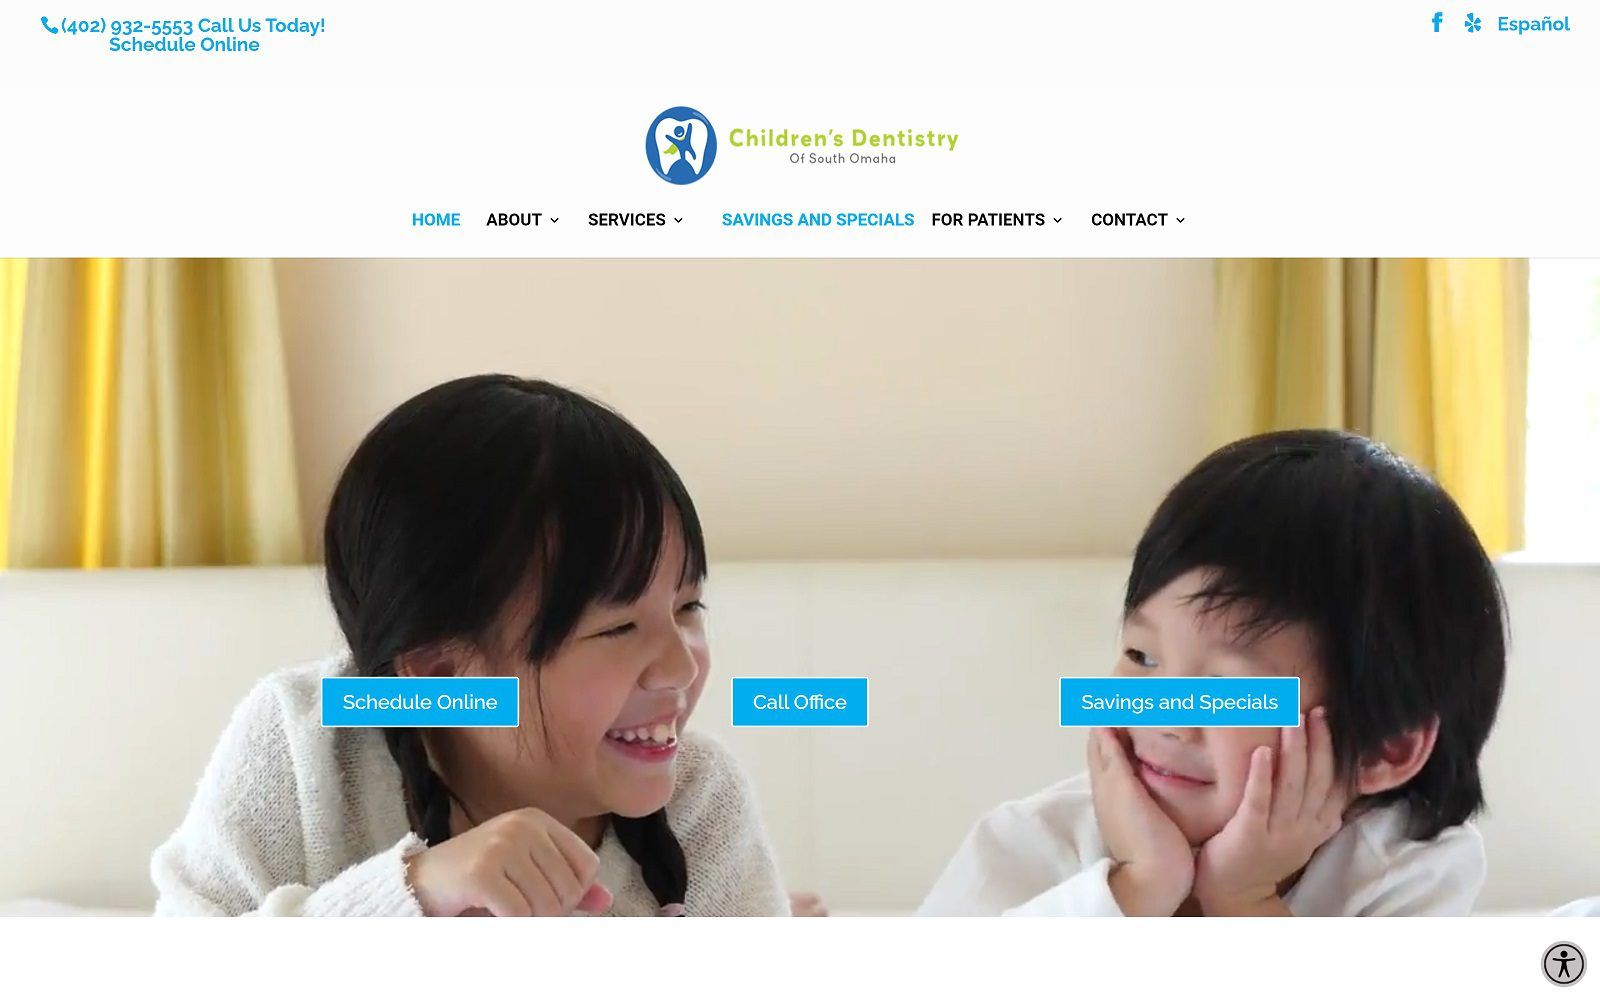 The screenshot of children's dentistry of south omaha website